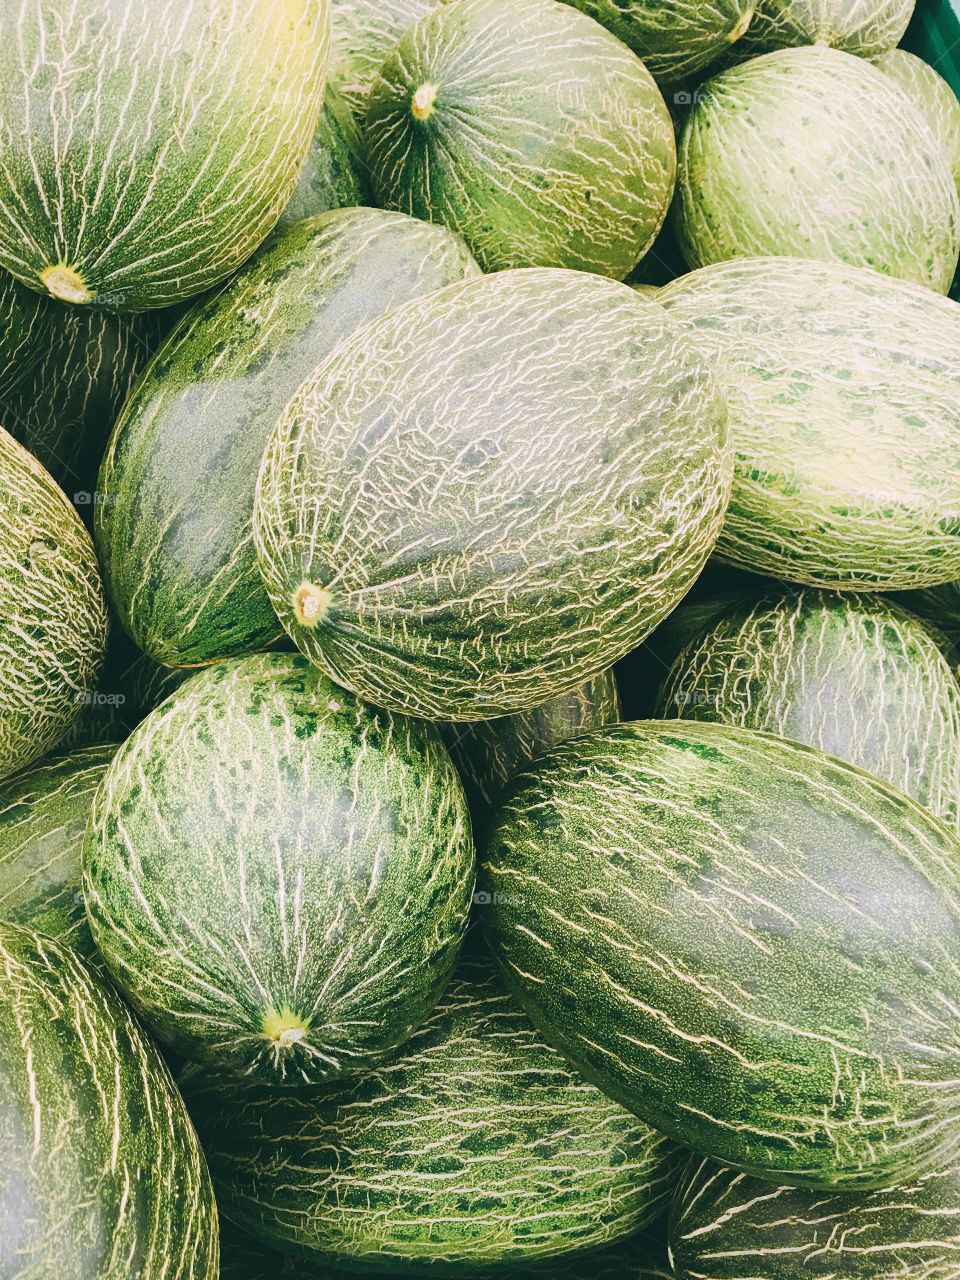 Green melones in the market